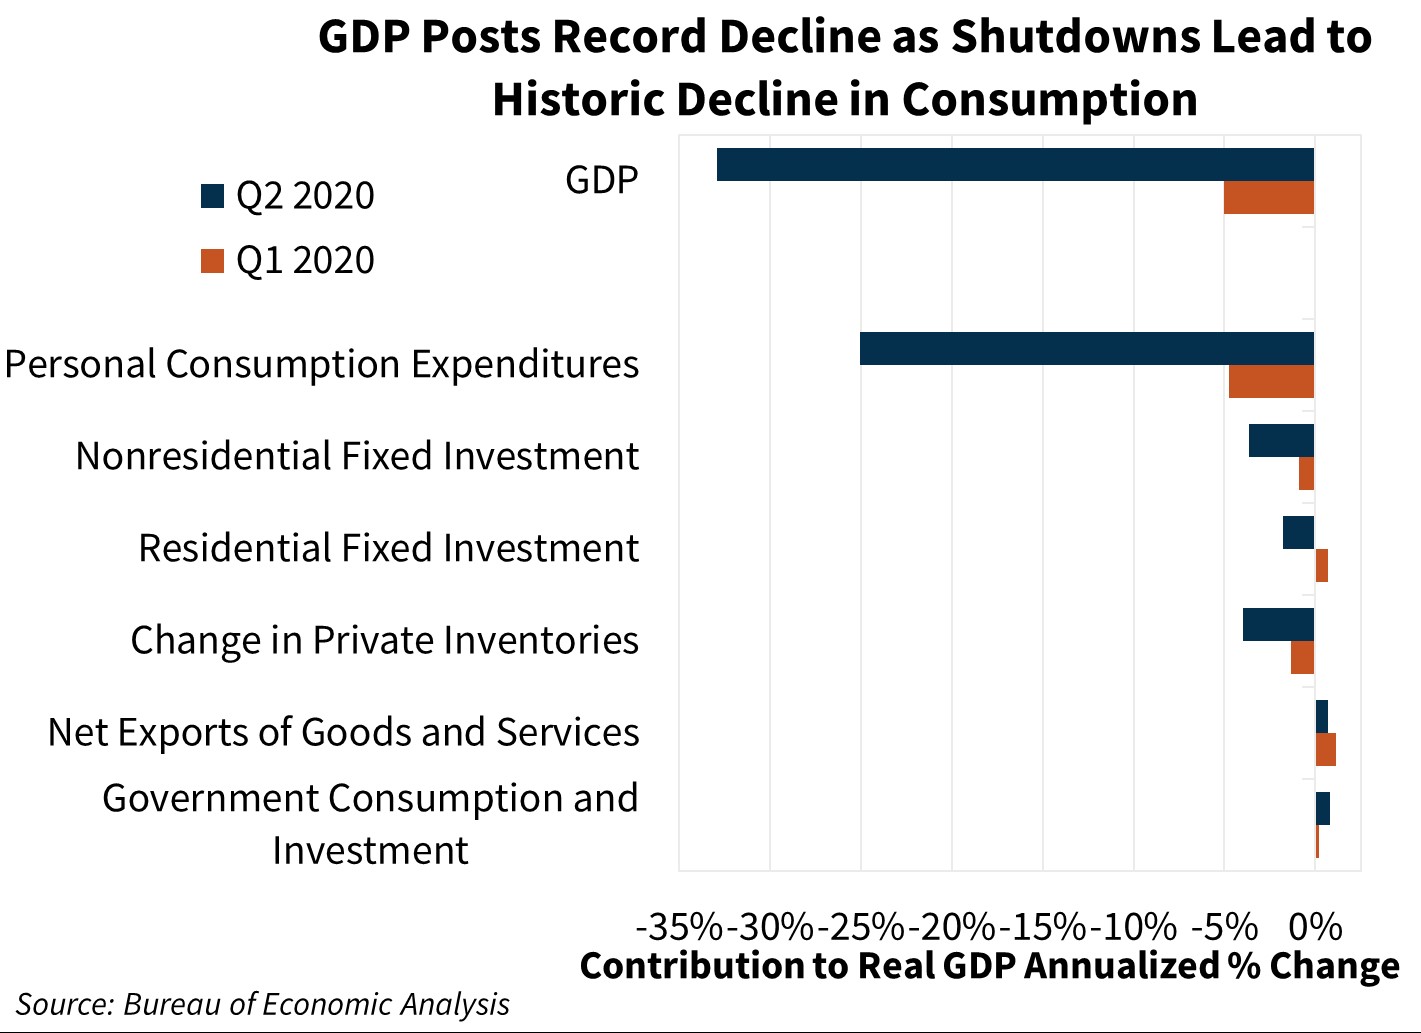 GDP Posts Record Decline as Shutdowns Lead to Historic Decline in Consumption 